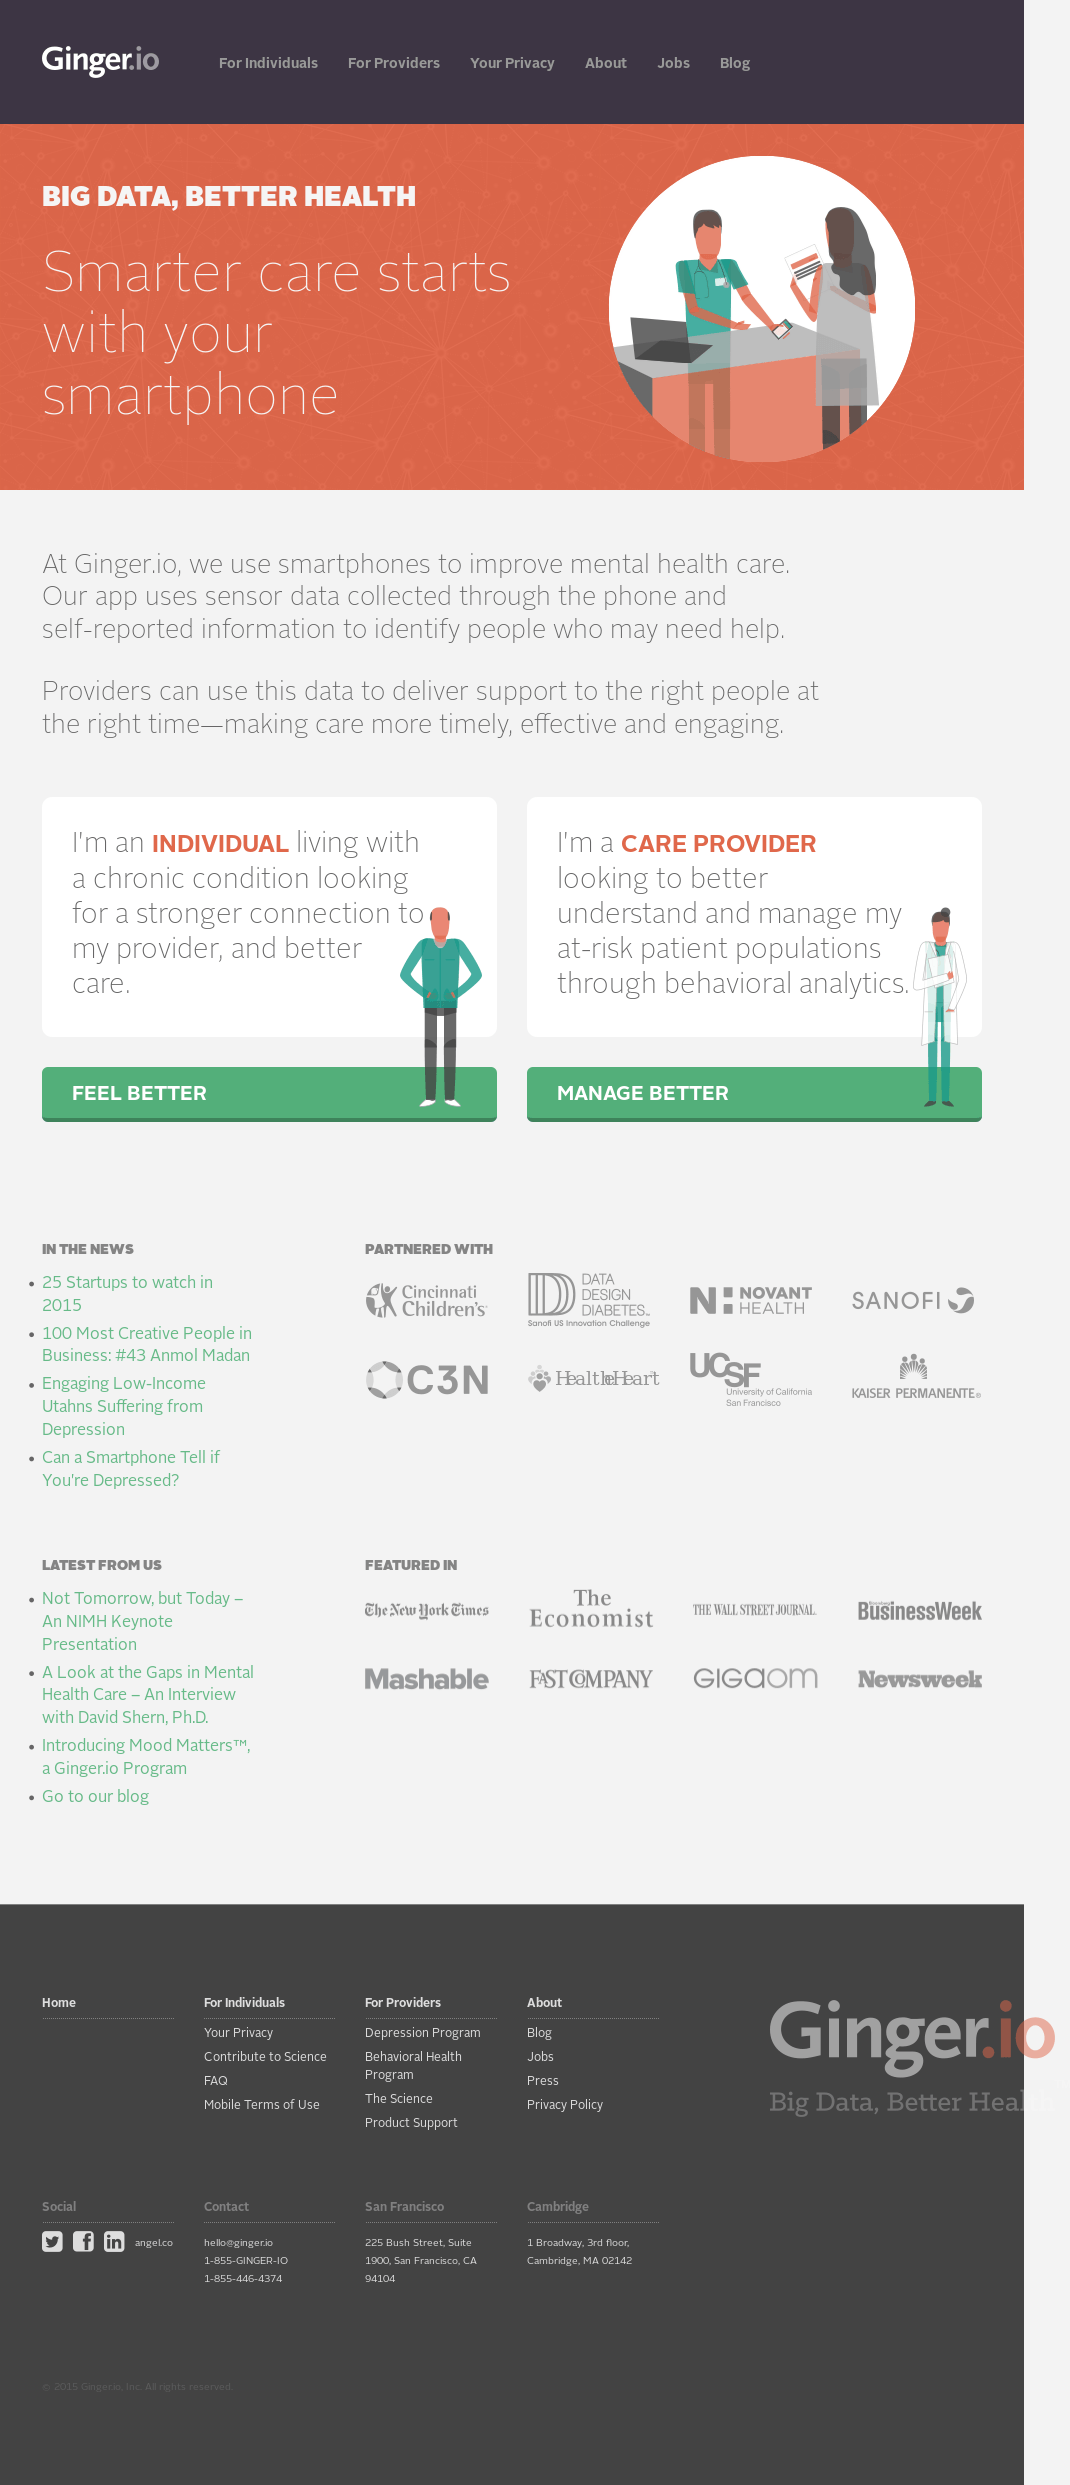 Ginger.io Logo - Ginger.io Competitors, Revenue and Employees - Owler Company Profile